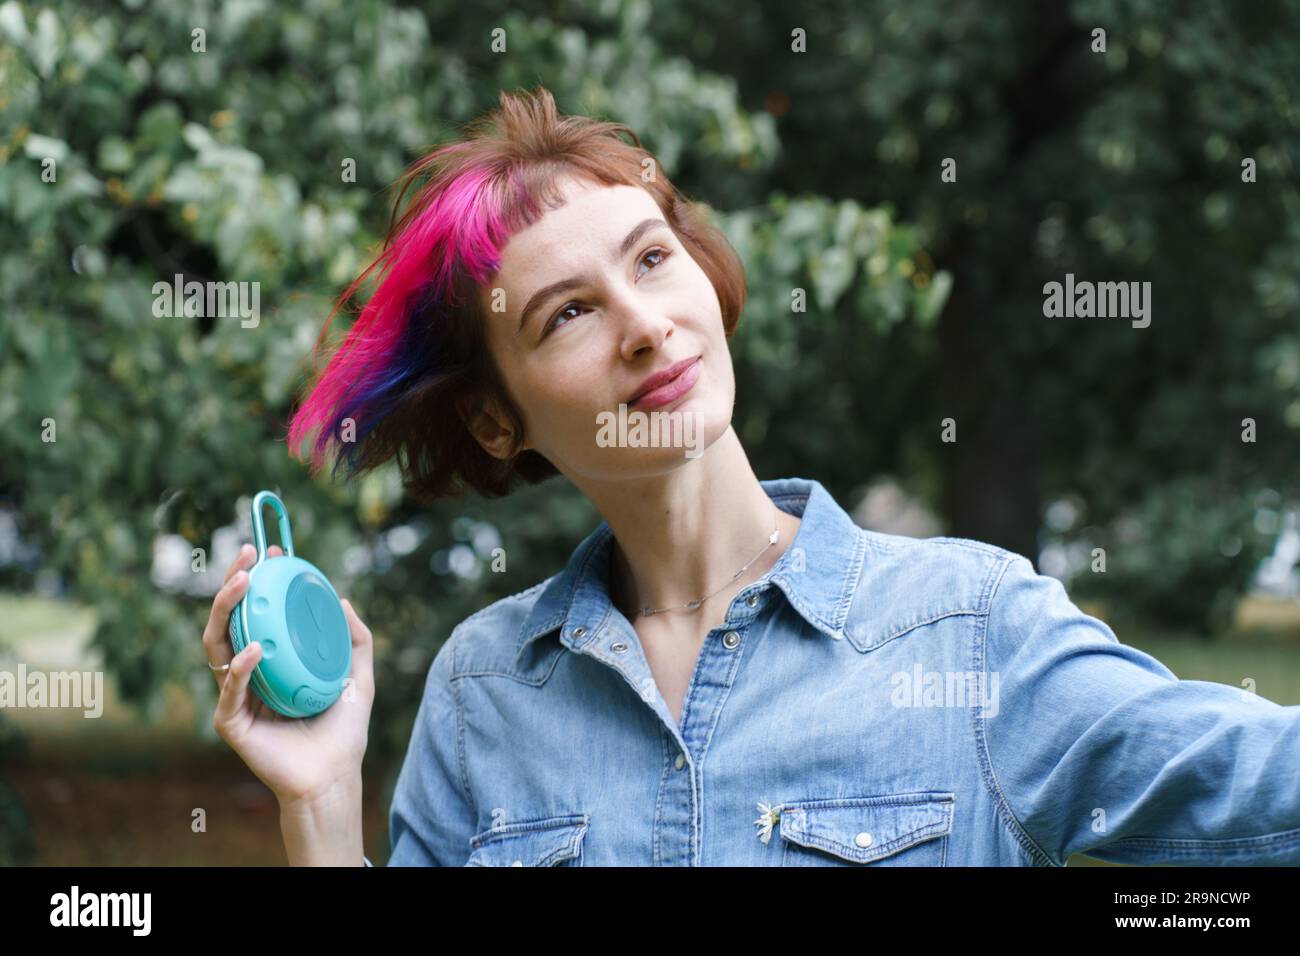 Woman with pink hair listens to music through the portable musical speaker in the park Stock Photo